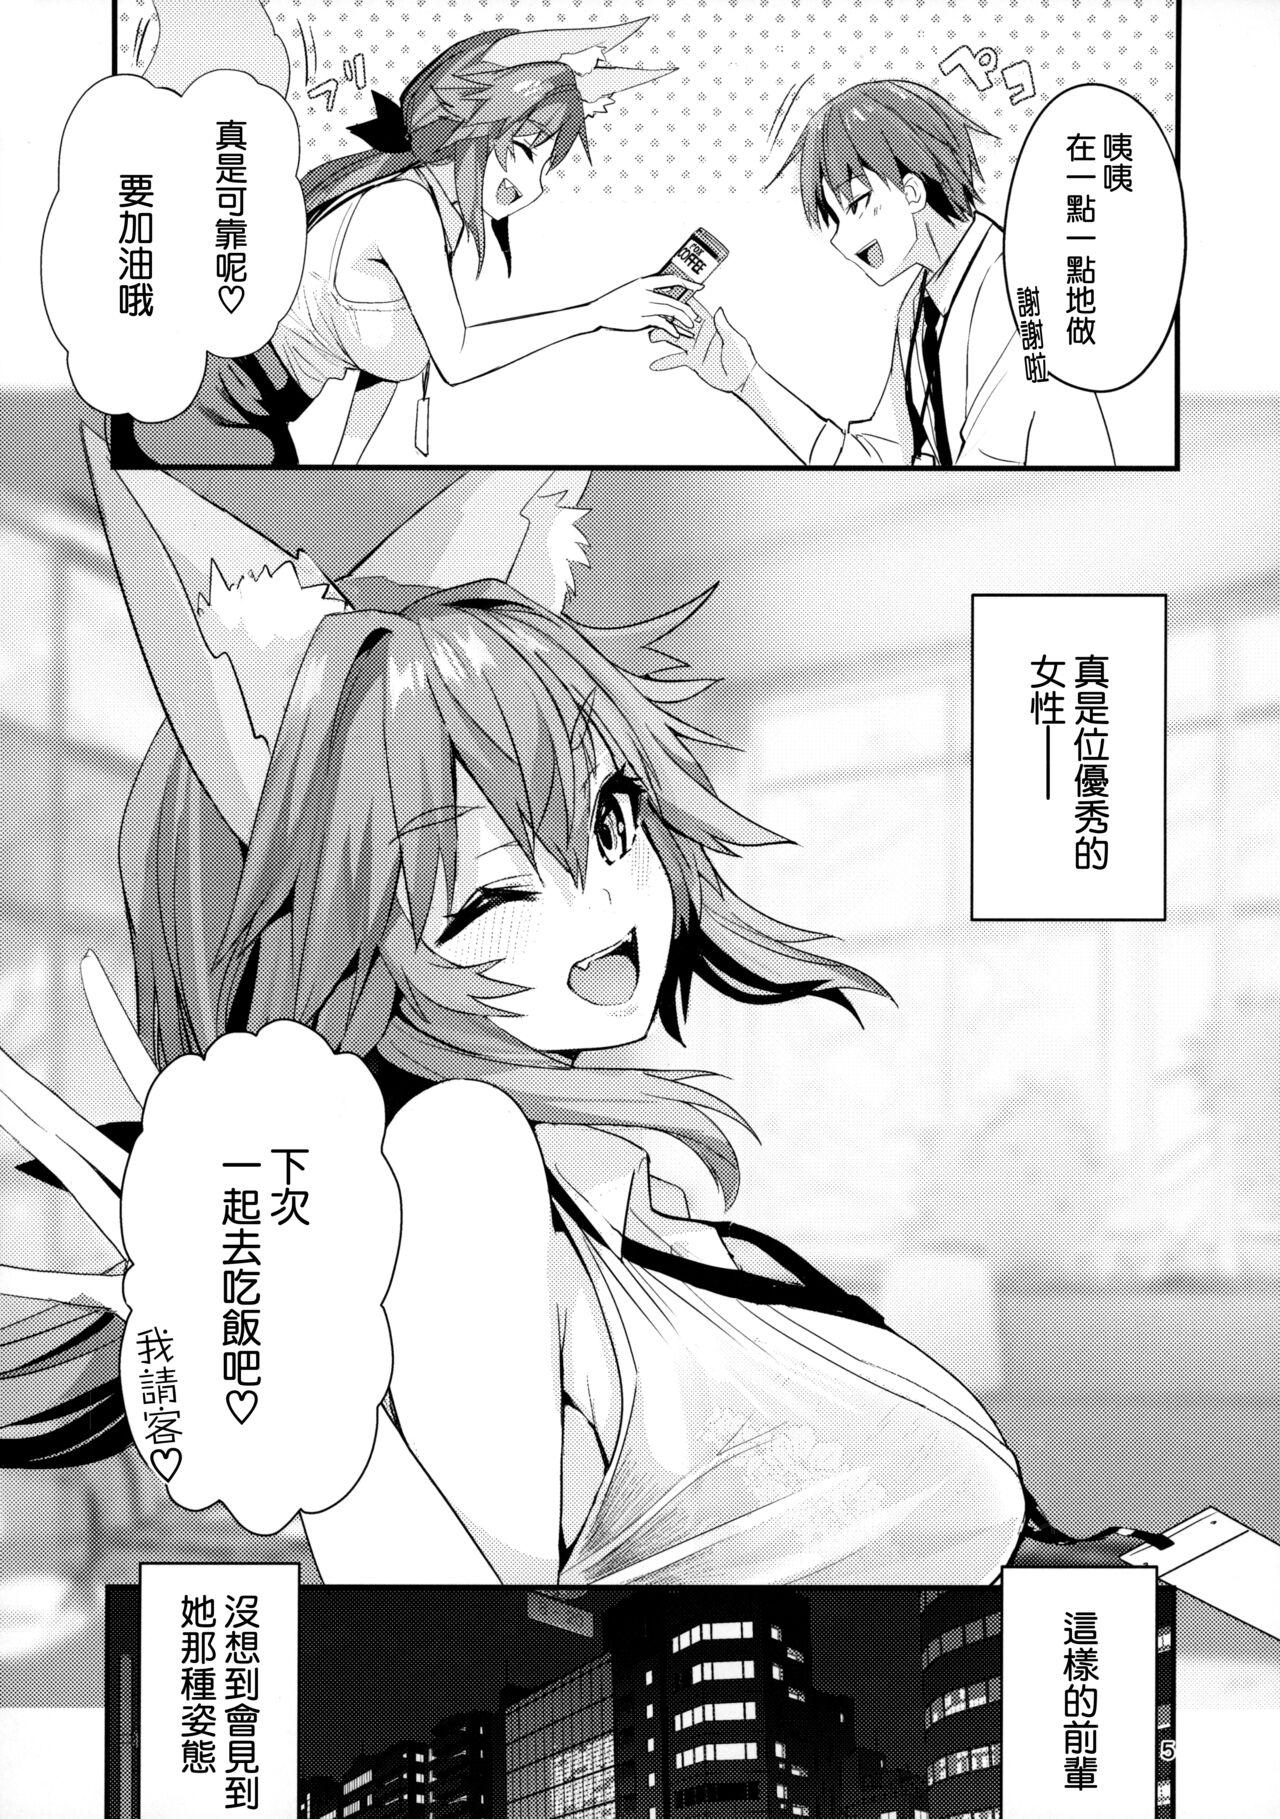 Blowjobs 先輩OLタマモさん - Fate extra Mature Woman - Page 5